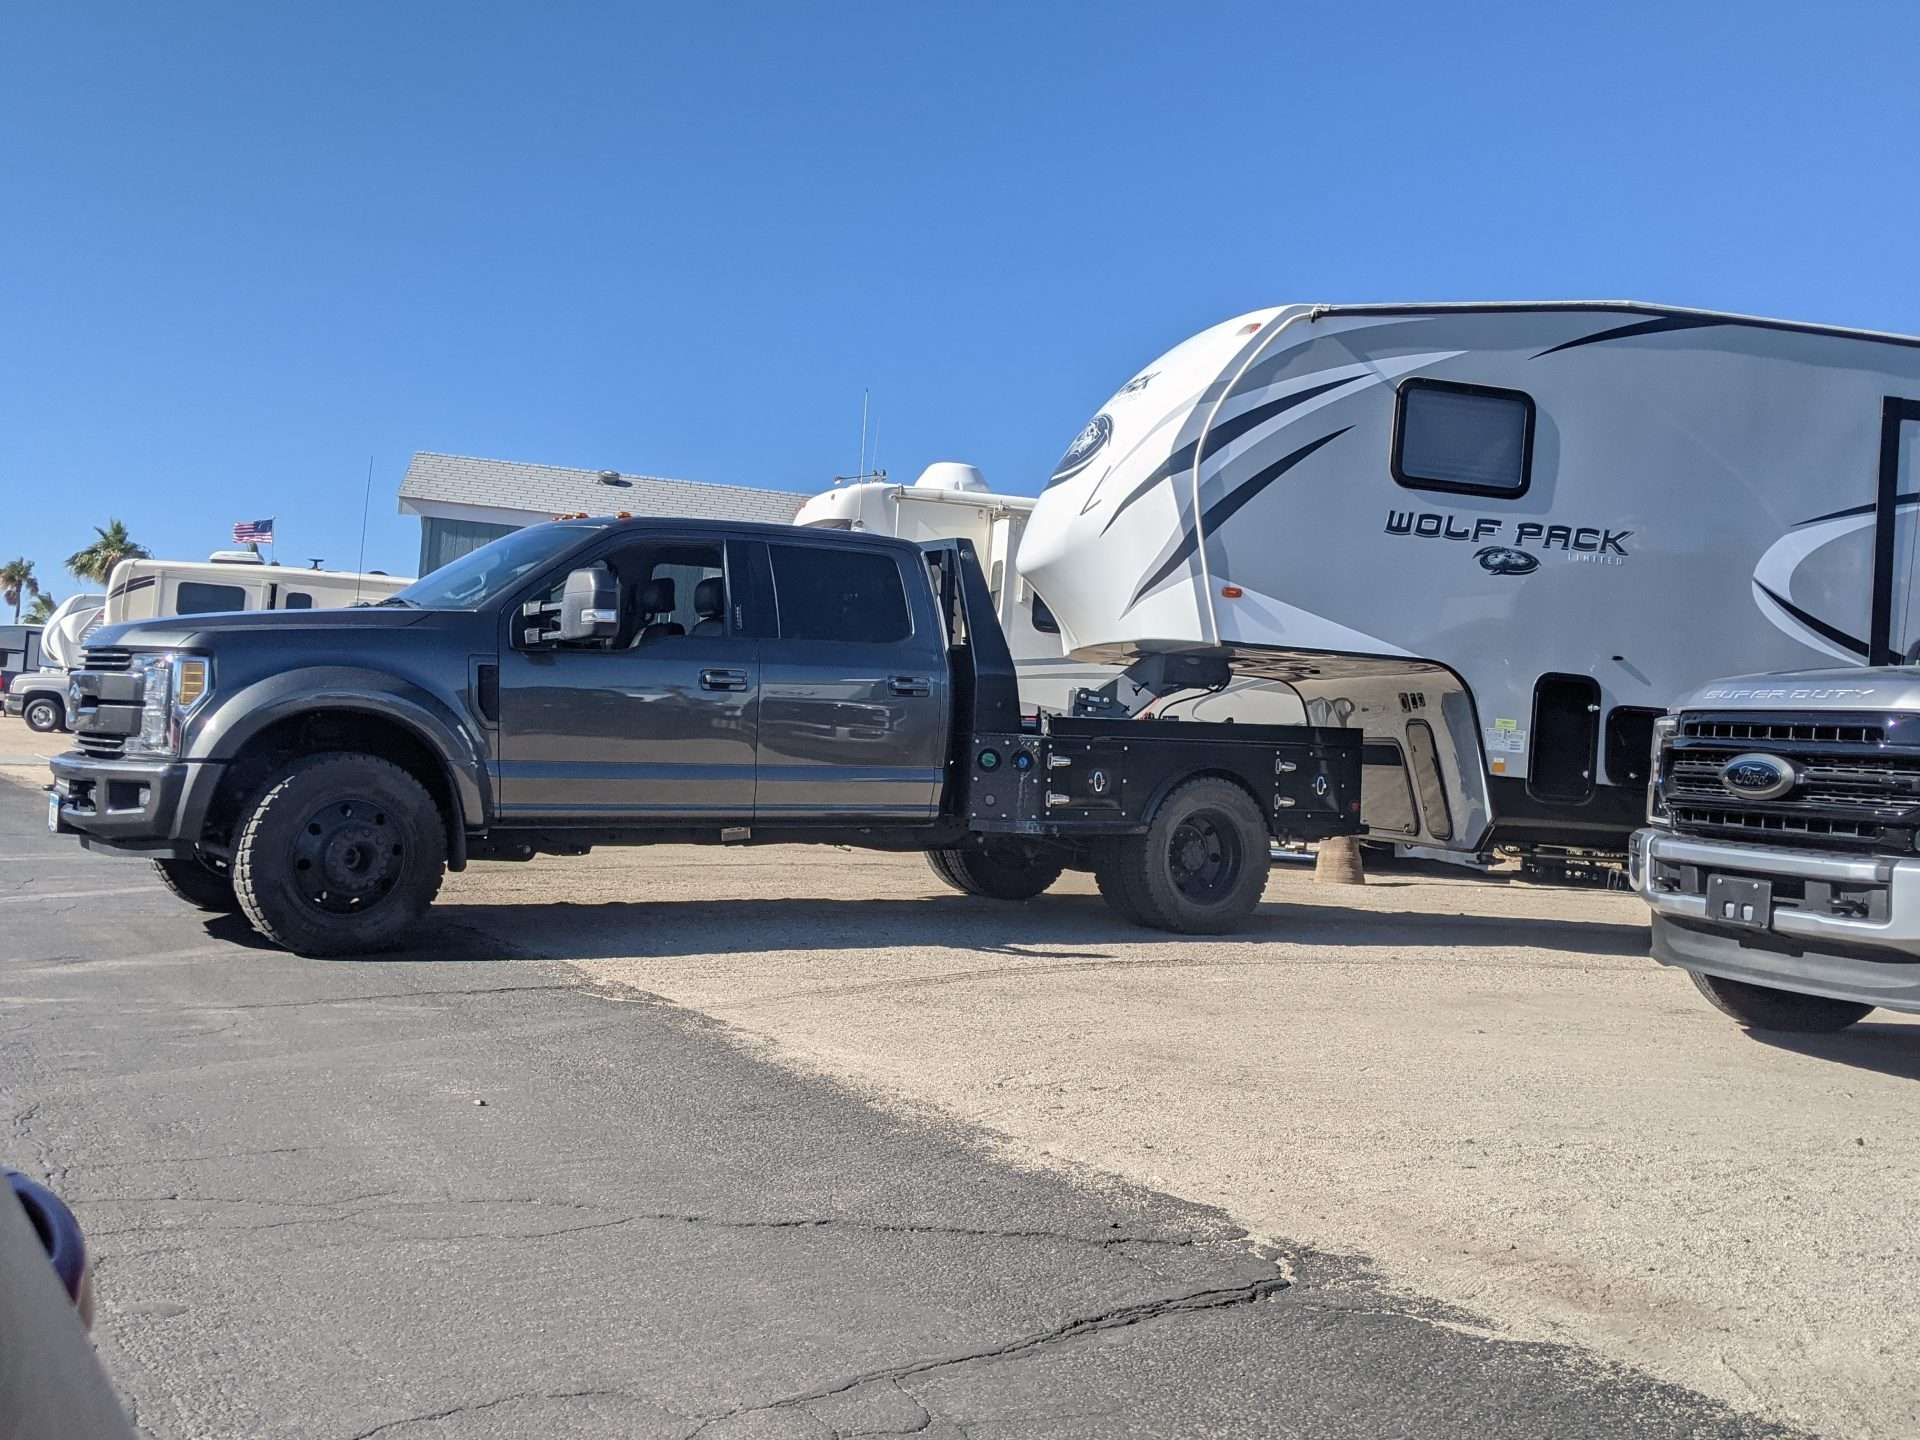 Dually truck towing fifth wheel